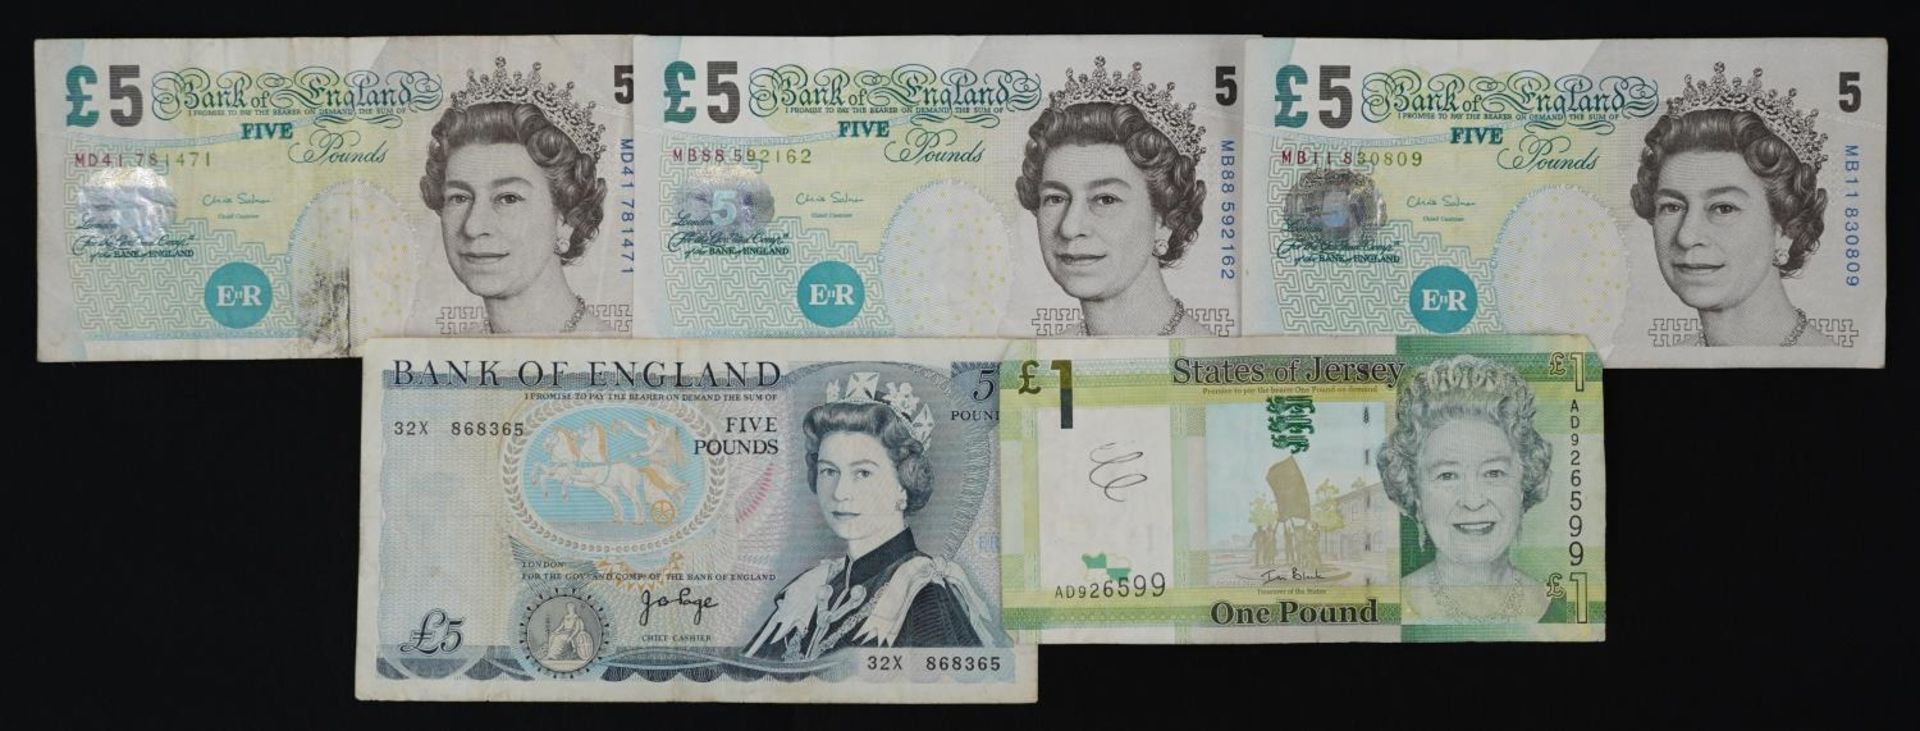 British and Irish banknotes including four Elizabeth II five pound notes